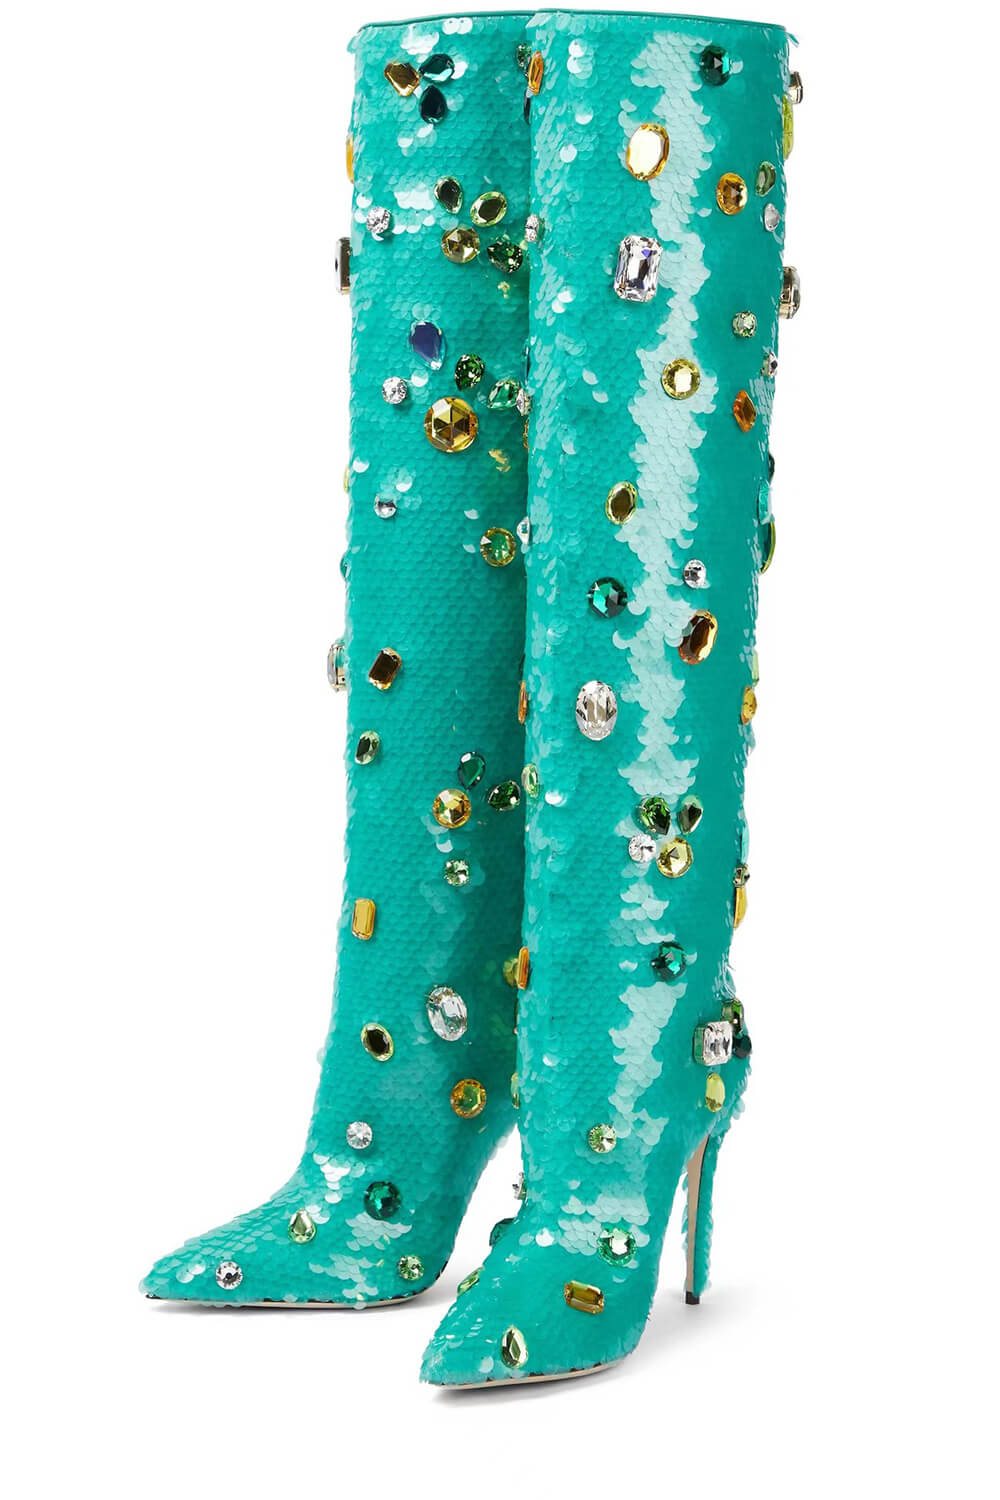 Green Sequined Pointed Toe Stiletto Heel Over The Knee Boots